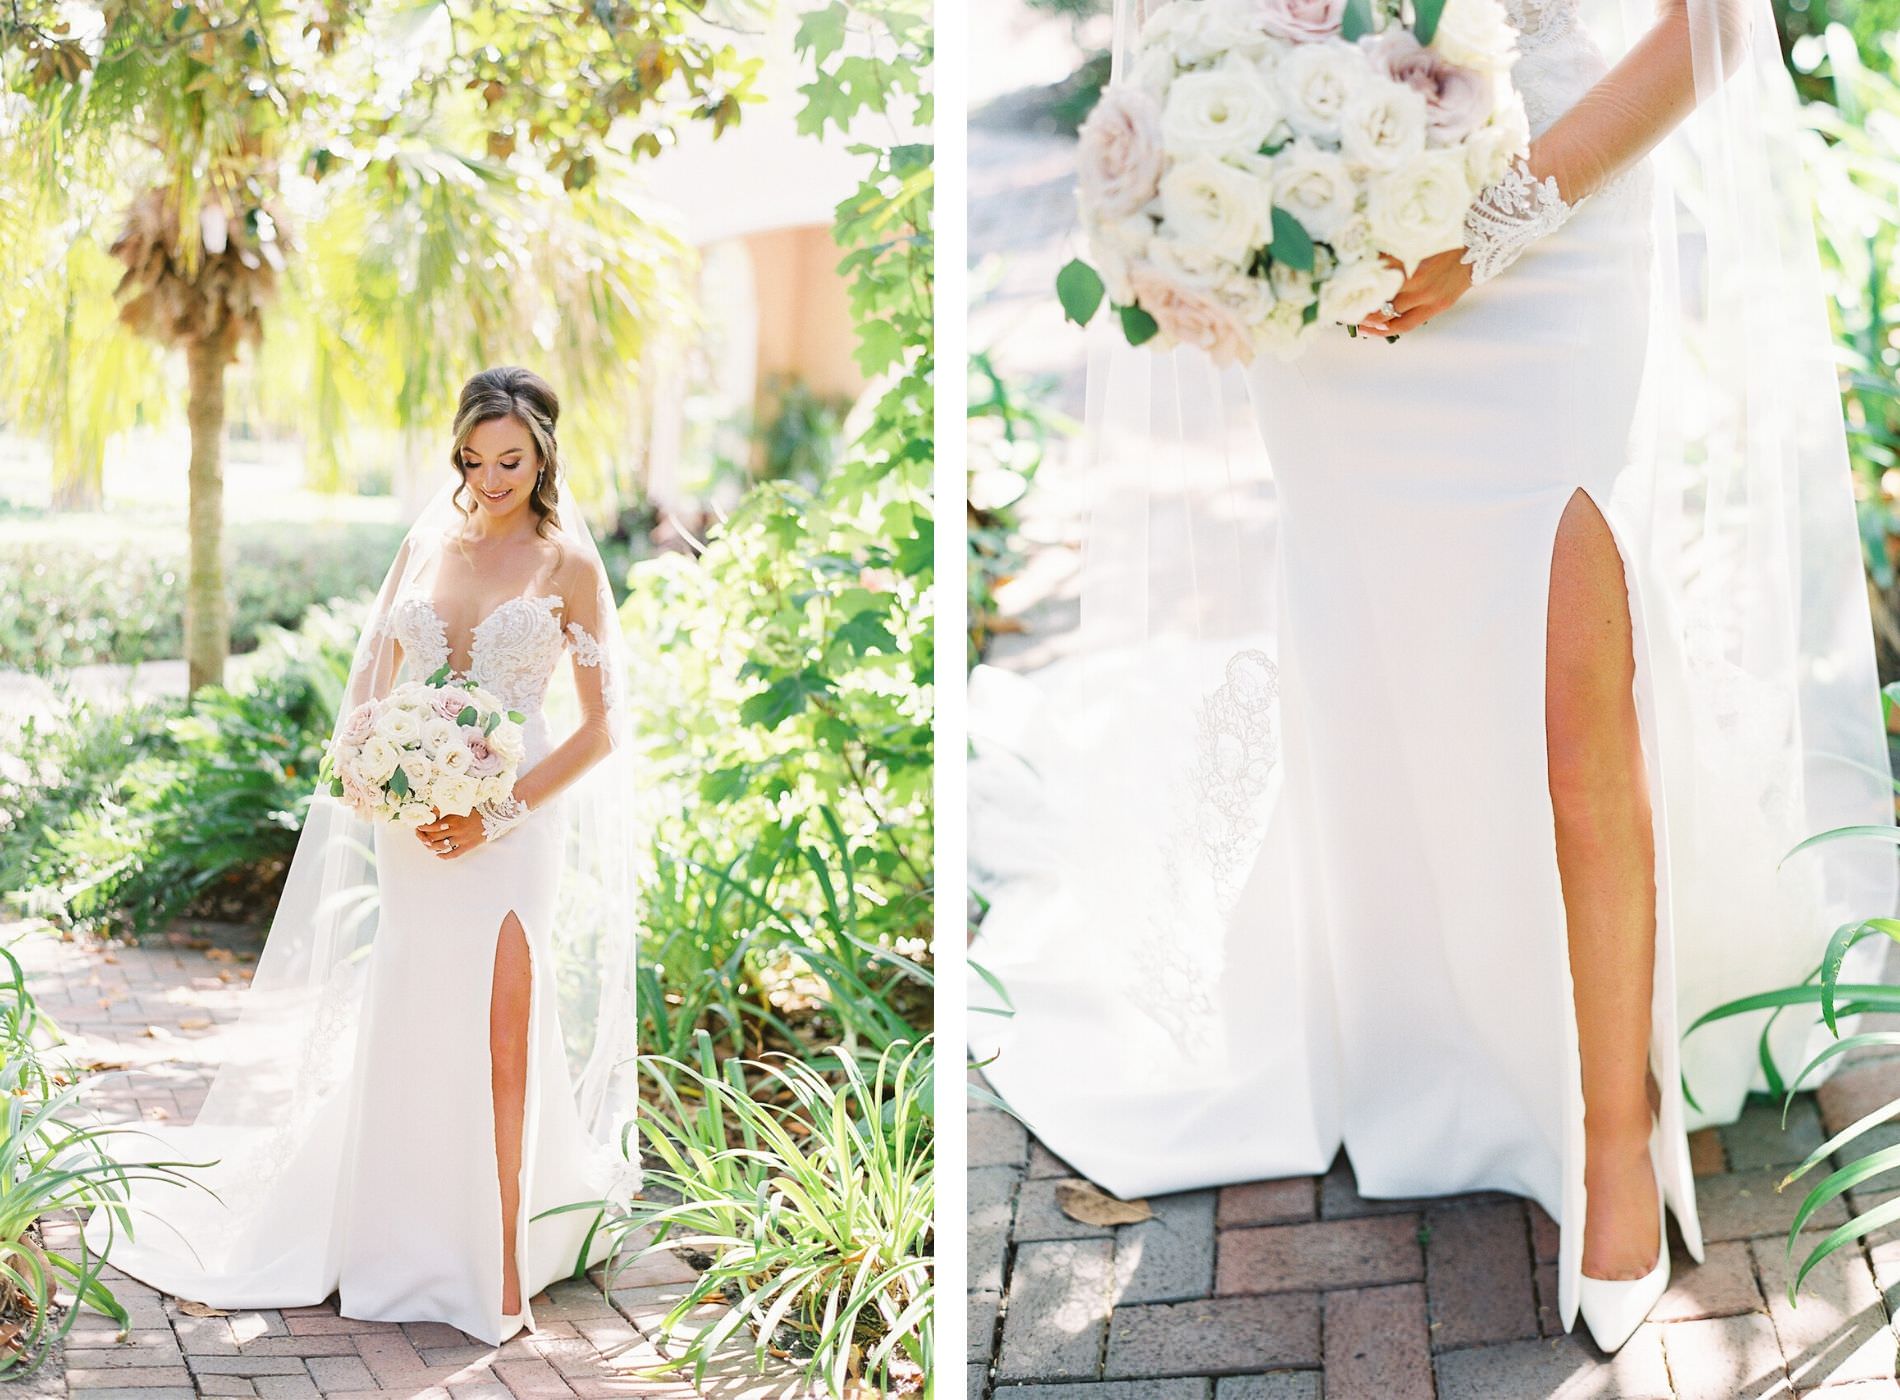 Ines di Santo Designer Bridal Gown Illusion Lace Sexy Wedding Dress with Slit | Outdoor Bridal Portrait at Tampa Wedding Venue Avila Golf & Country Club | White and Blush Pink Round Rose Bridal Bouquet | Isabel O'Neil Bridal Collection